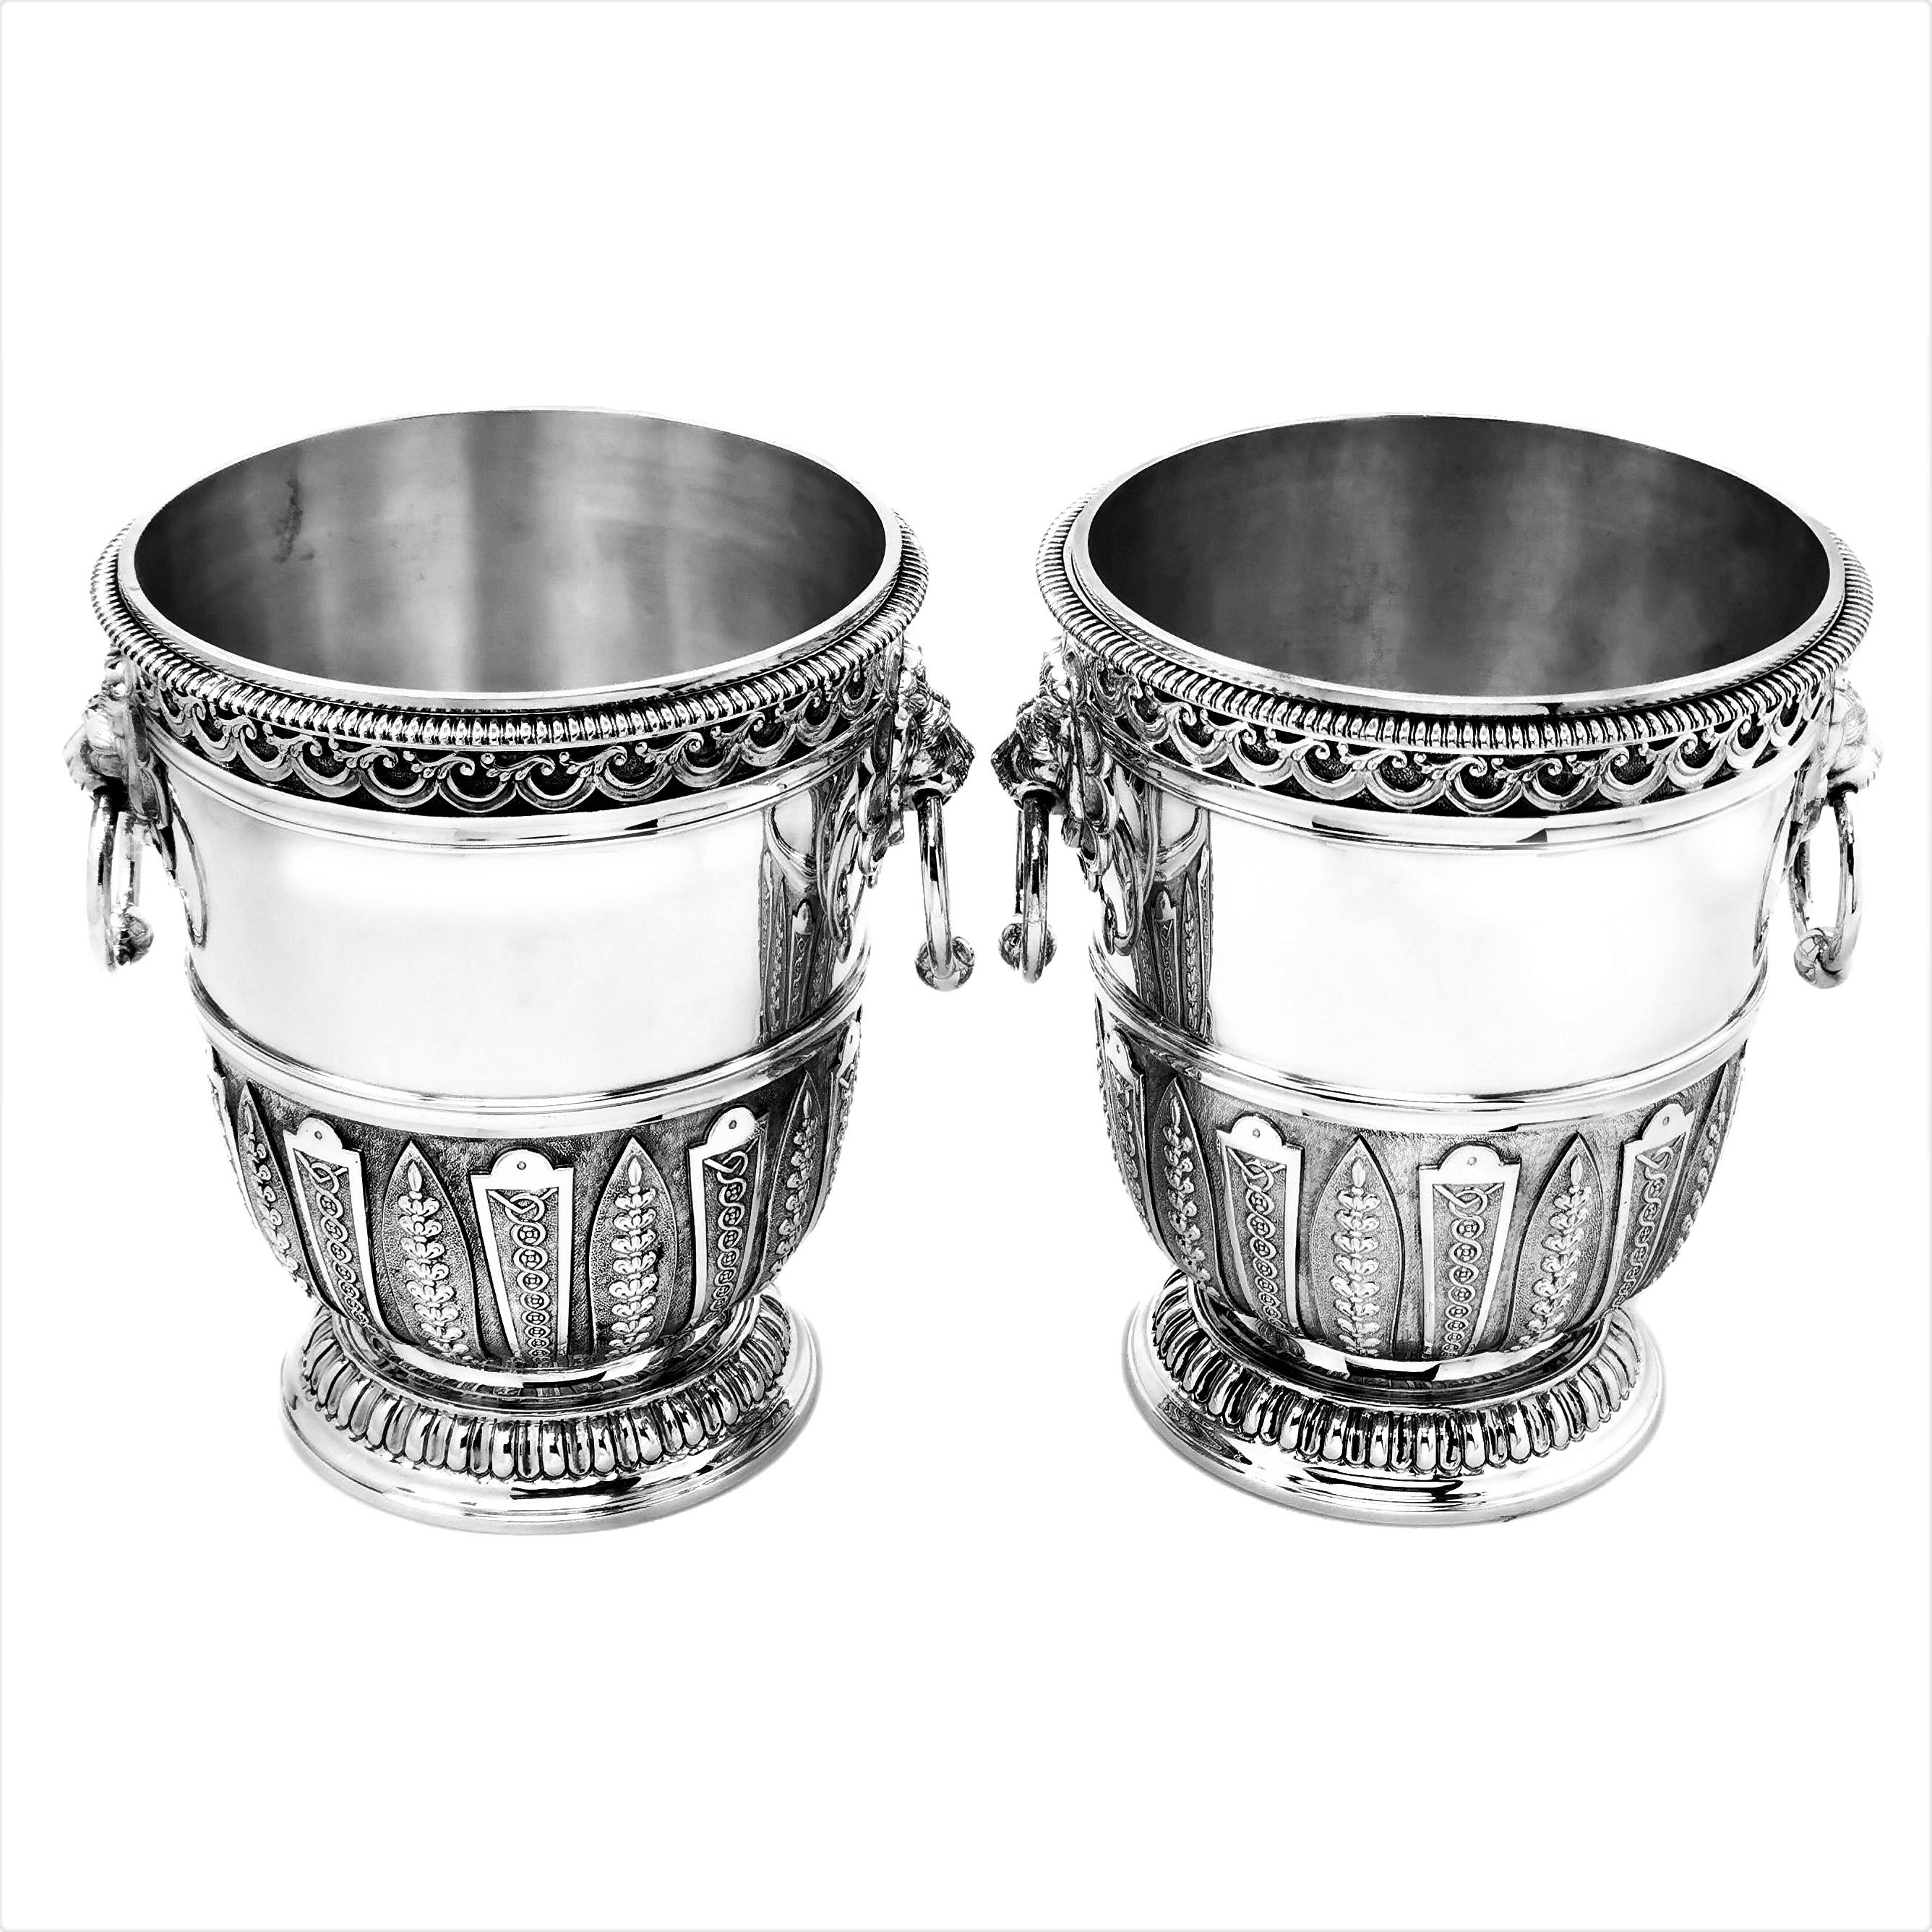 A pair of magnificent solid Silver Champagne Coolers / Wine Buckets each with a pair of impressive lion head handles. Each Champagne Bucket is further embellished with repeating chased designs around the body and below the upper rim. The Coolers